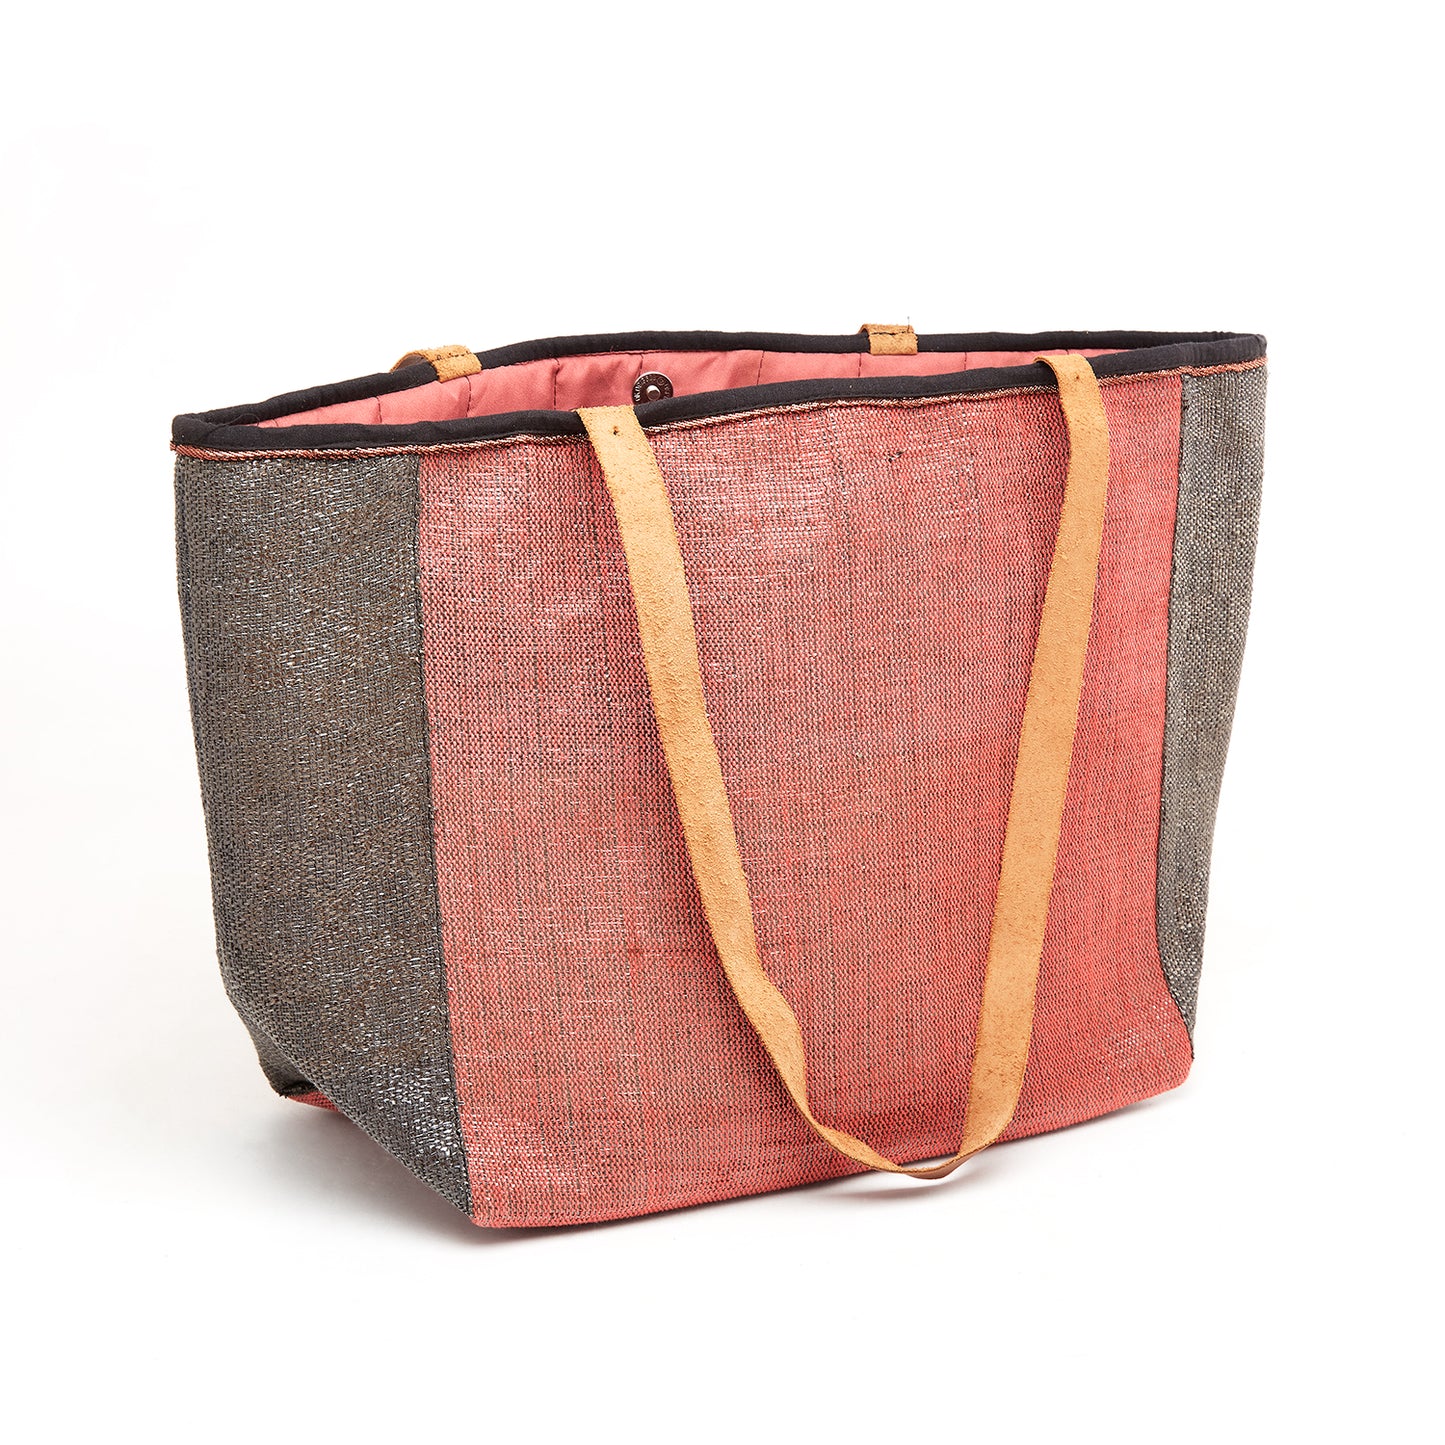 Charcoal Black & Blush Red Colored Tapric Bag